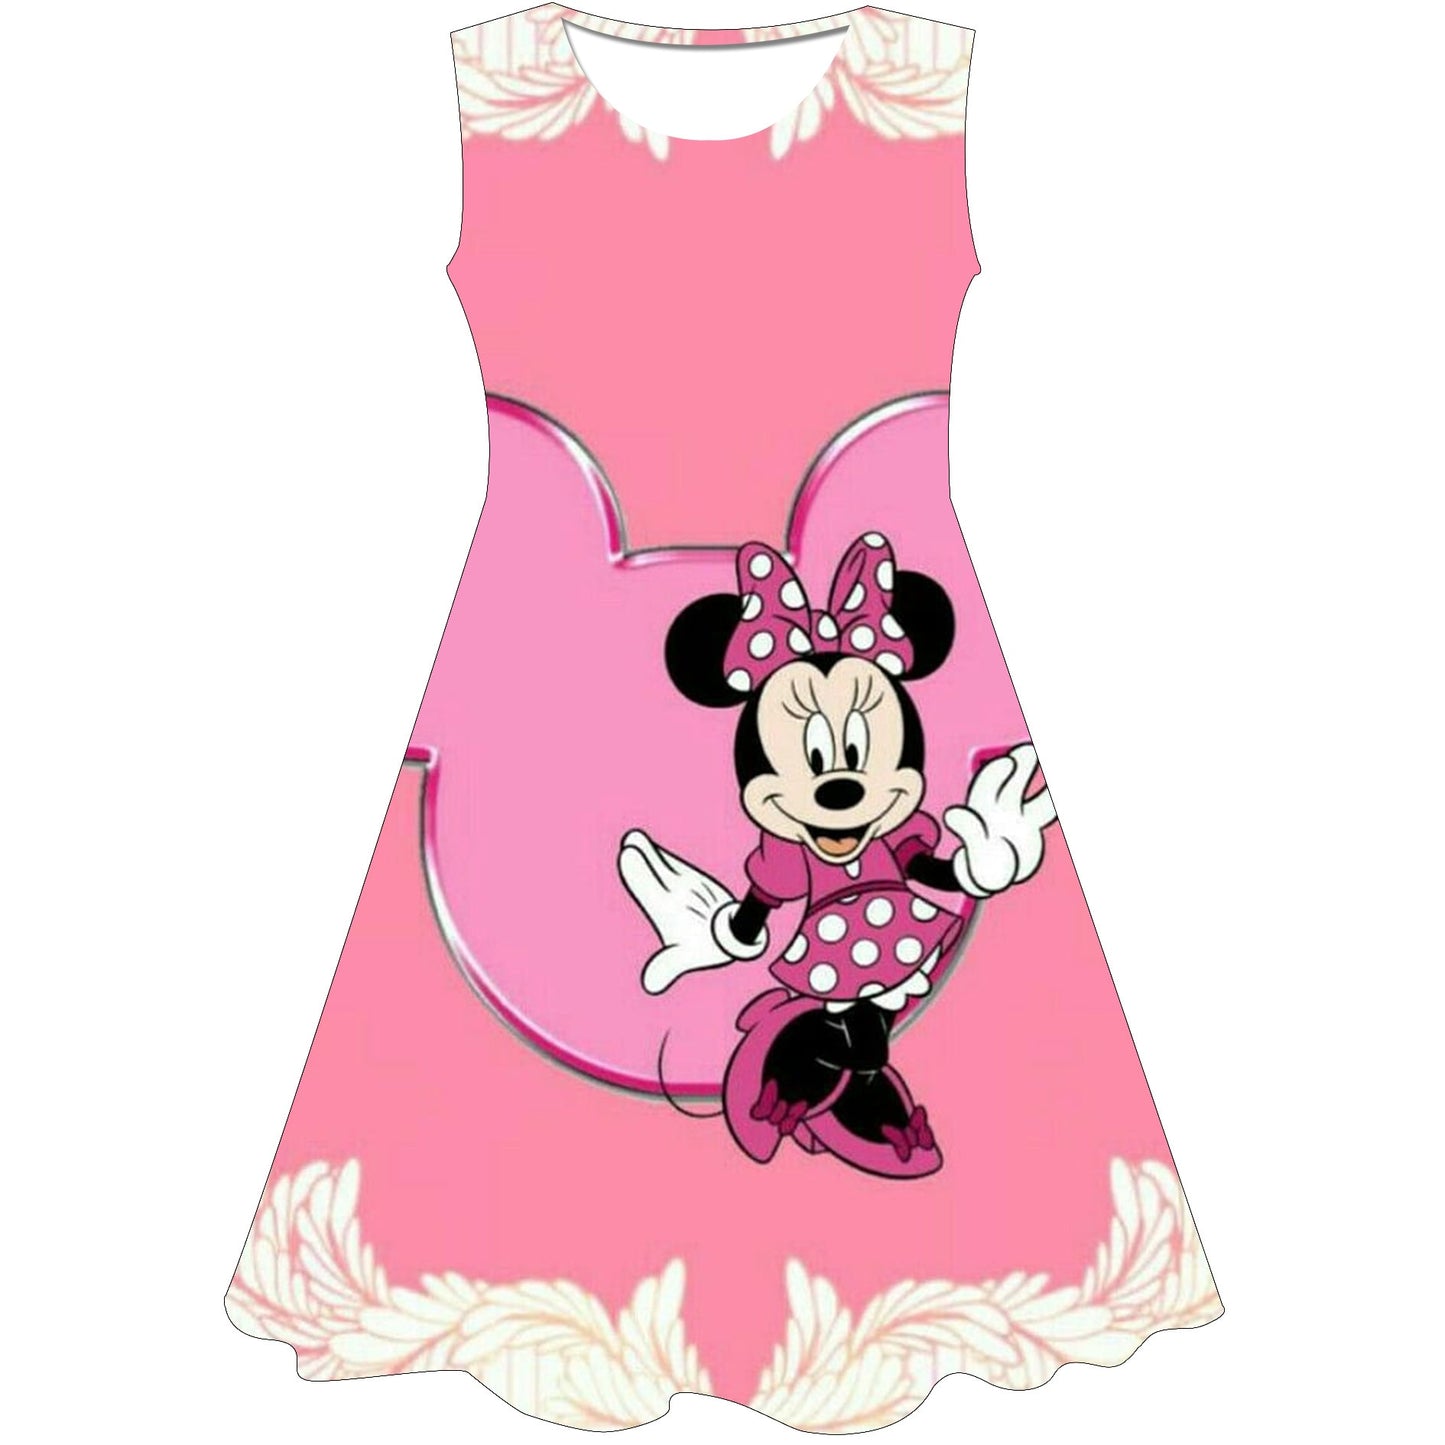 Minnie Mouse Dress for Girls